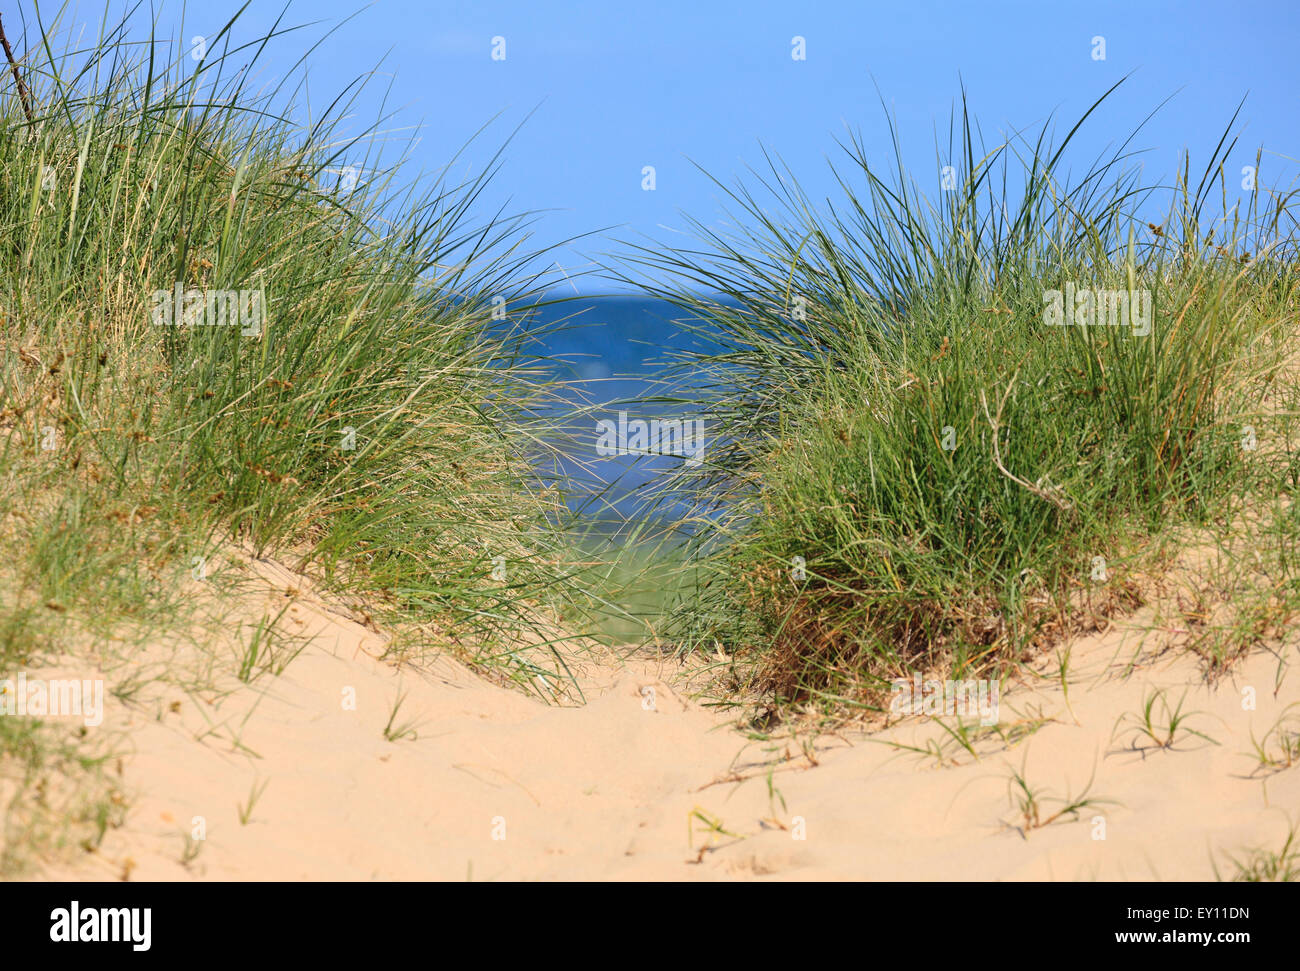 Gap in the dunes with the sea visible beyond. Stock Photo